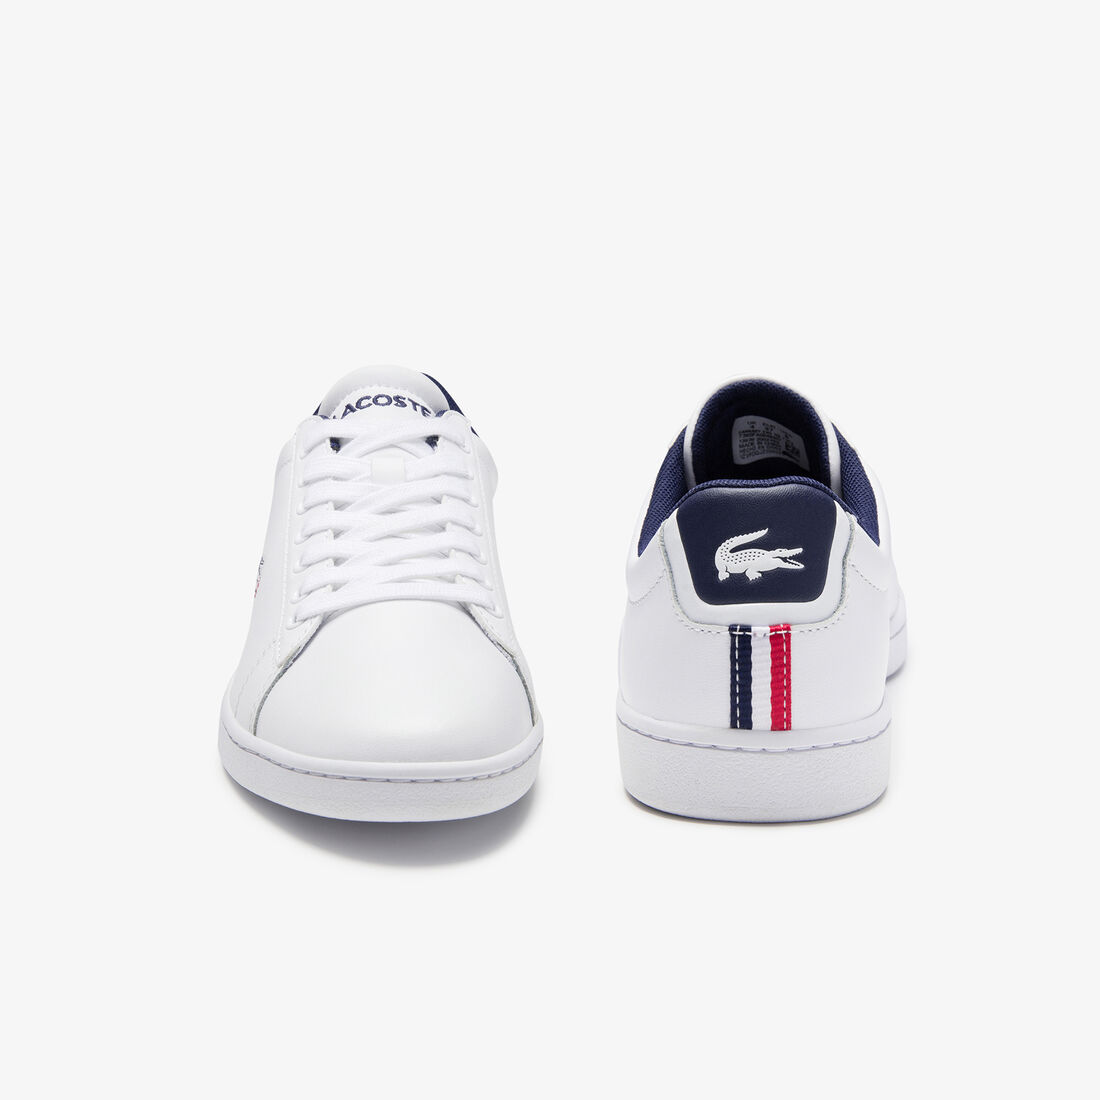 Lacoste Carnaby Evo Tricolore Leder And Synthetik Sneakers Damen Weiß | IGAL-06745